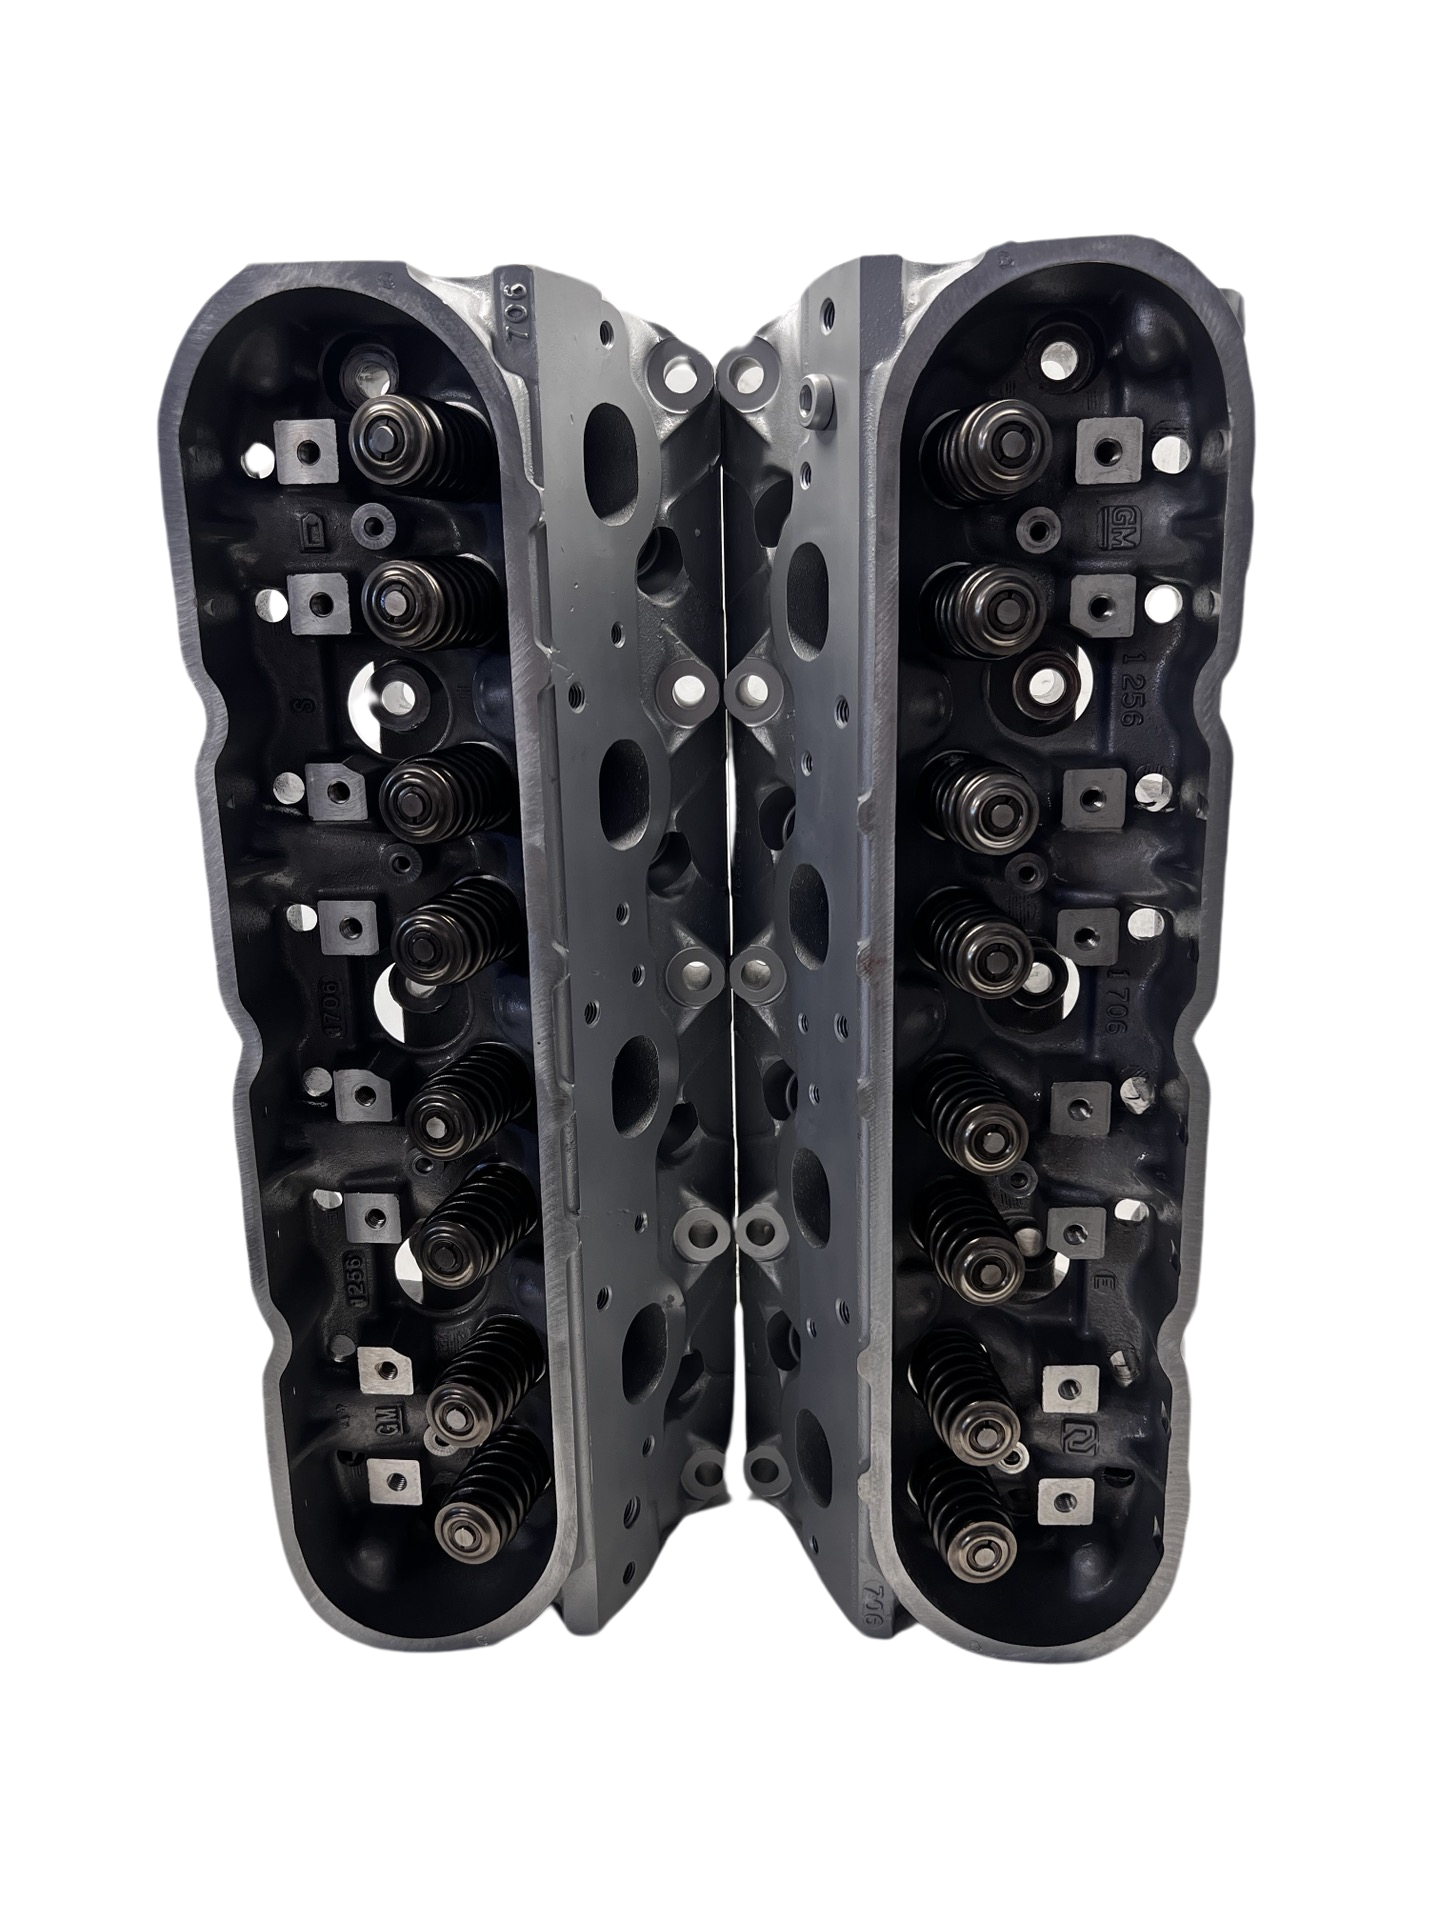 Top view of cylinder heads for a GM 4.8 / 5.3 ALUMINUM LS4 Casting #706 (SOLD IN PAIR)